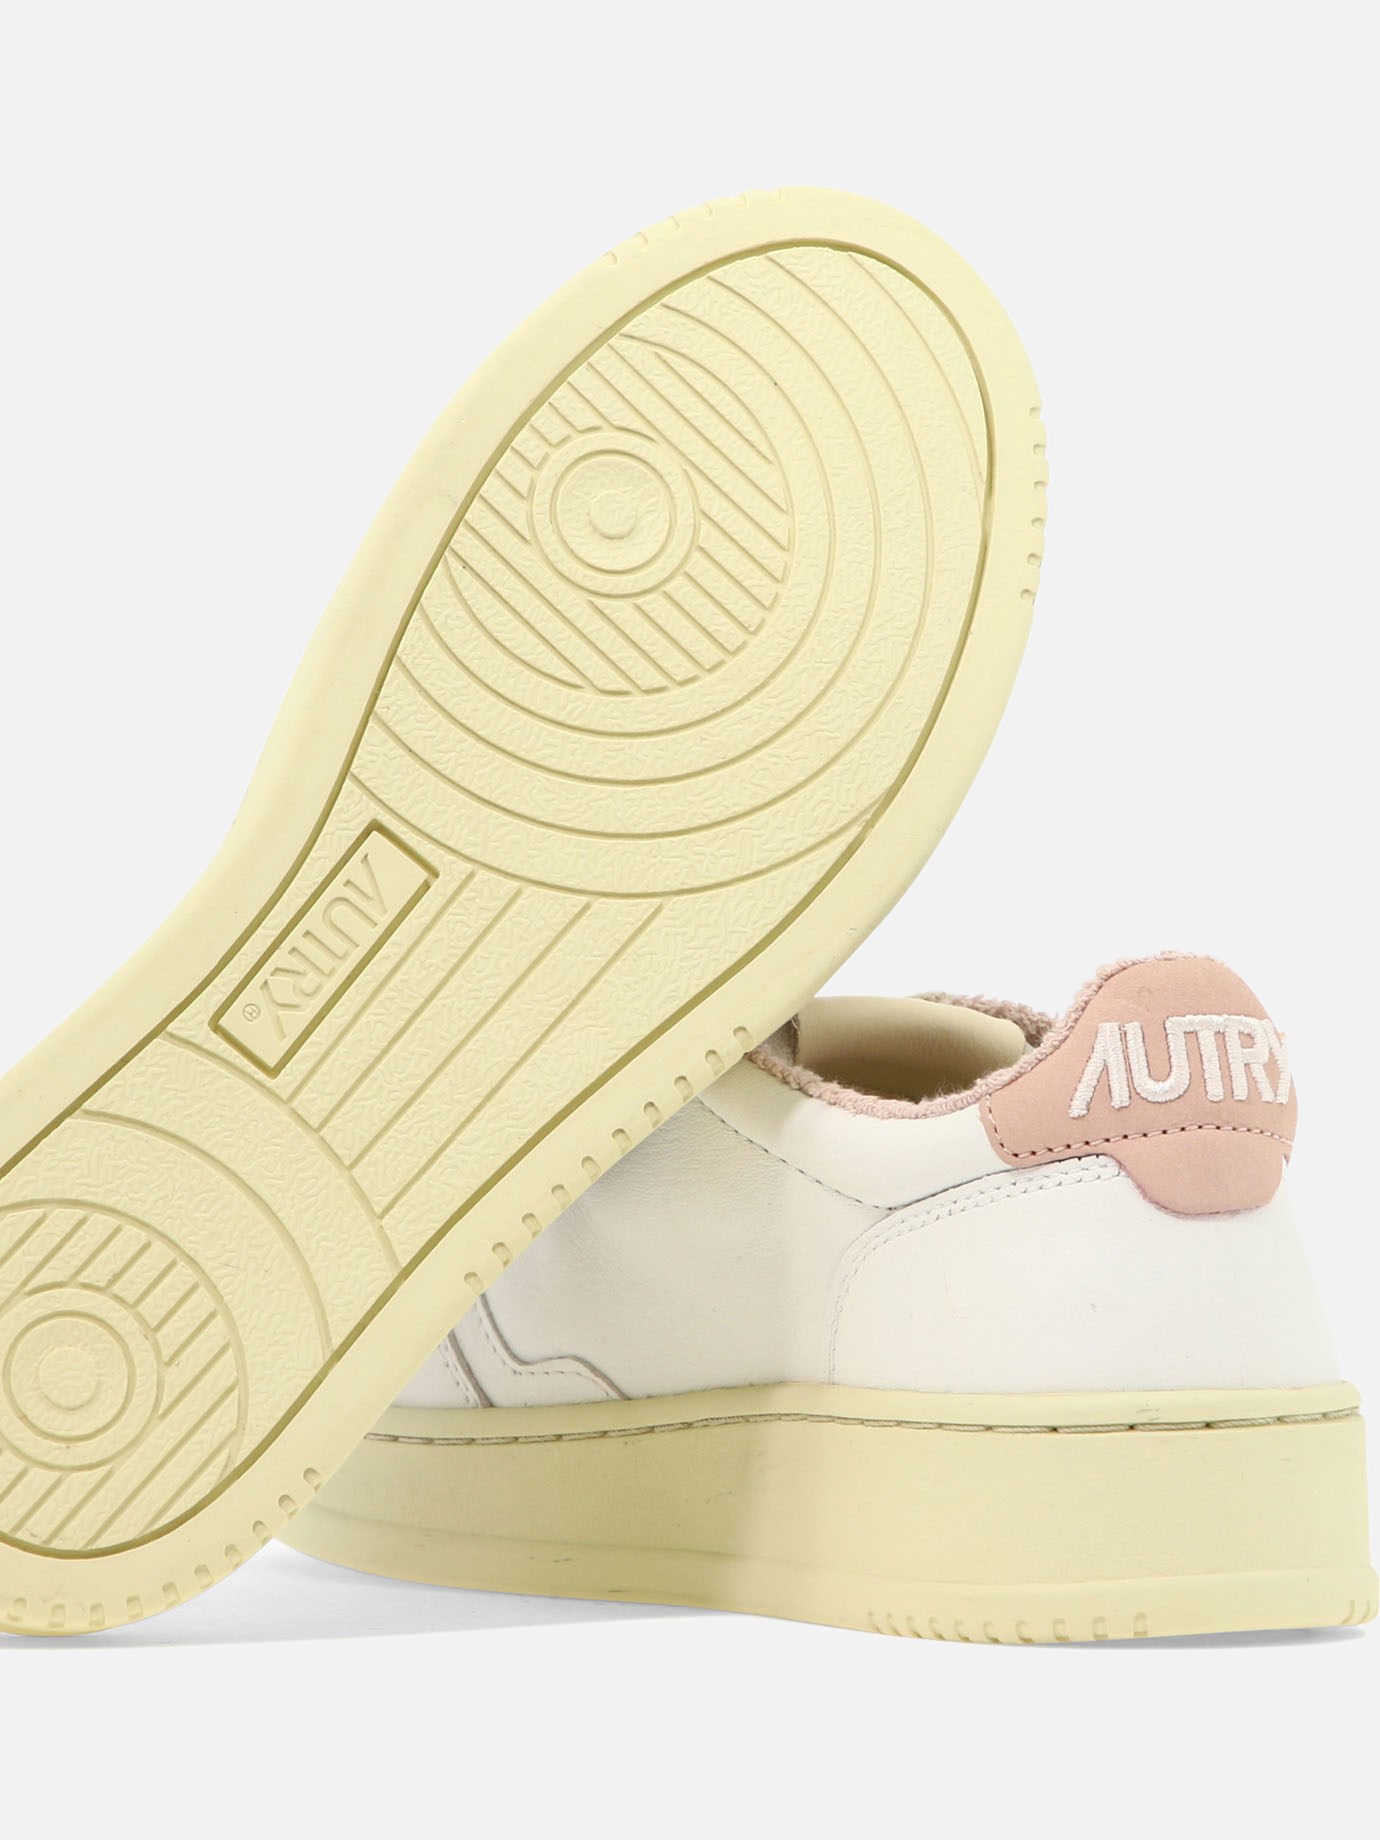 Sneaker  Autry 01  by Autry